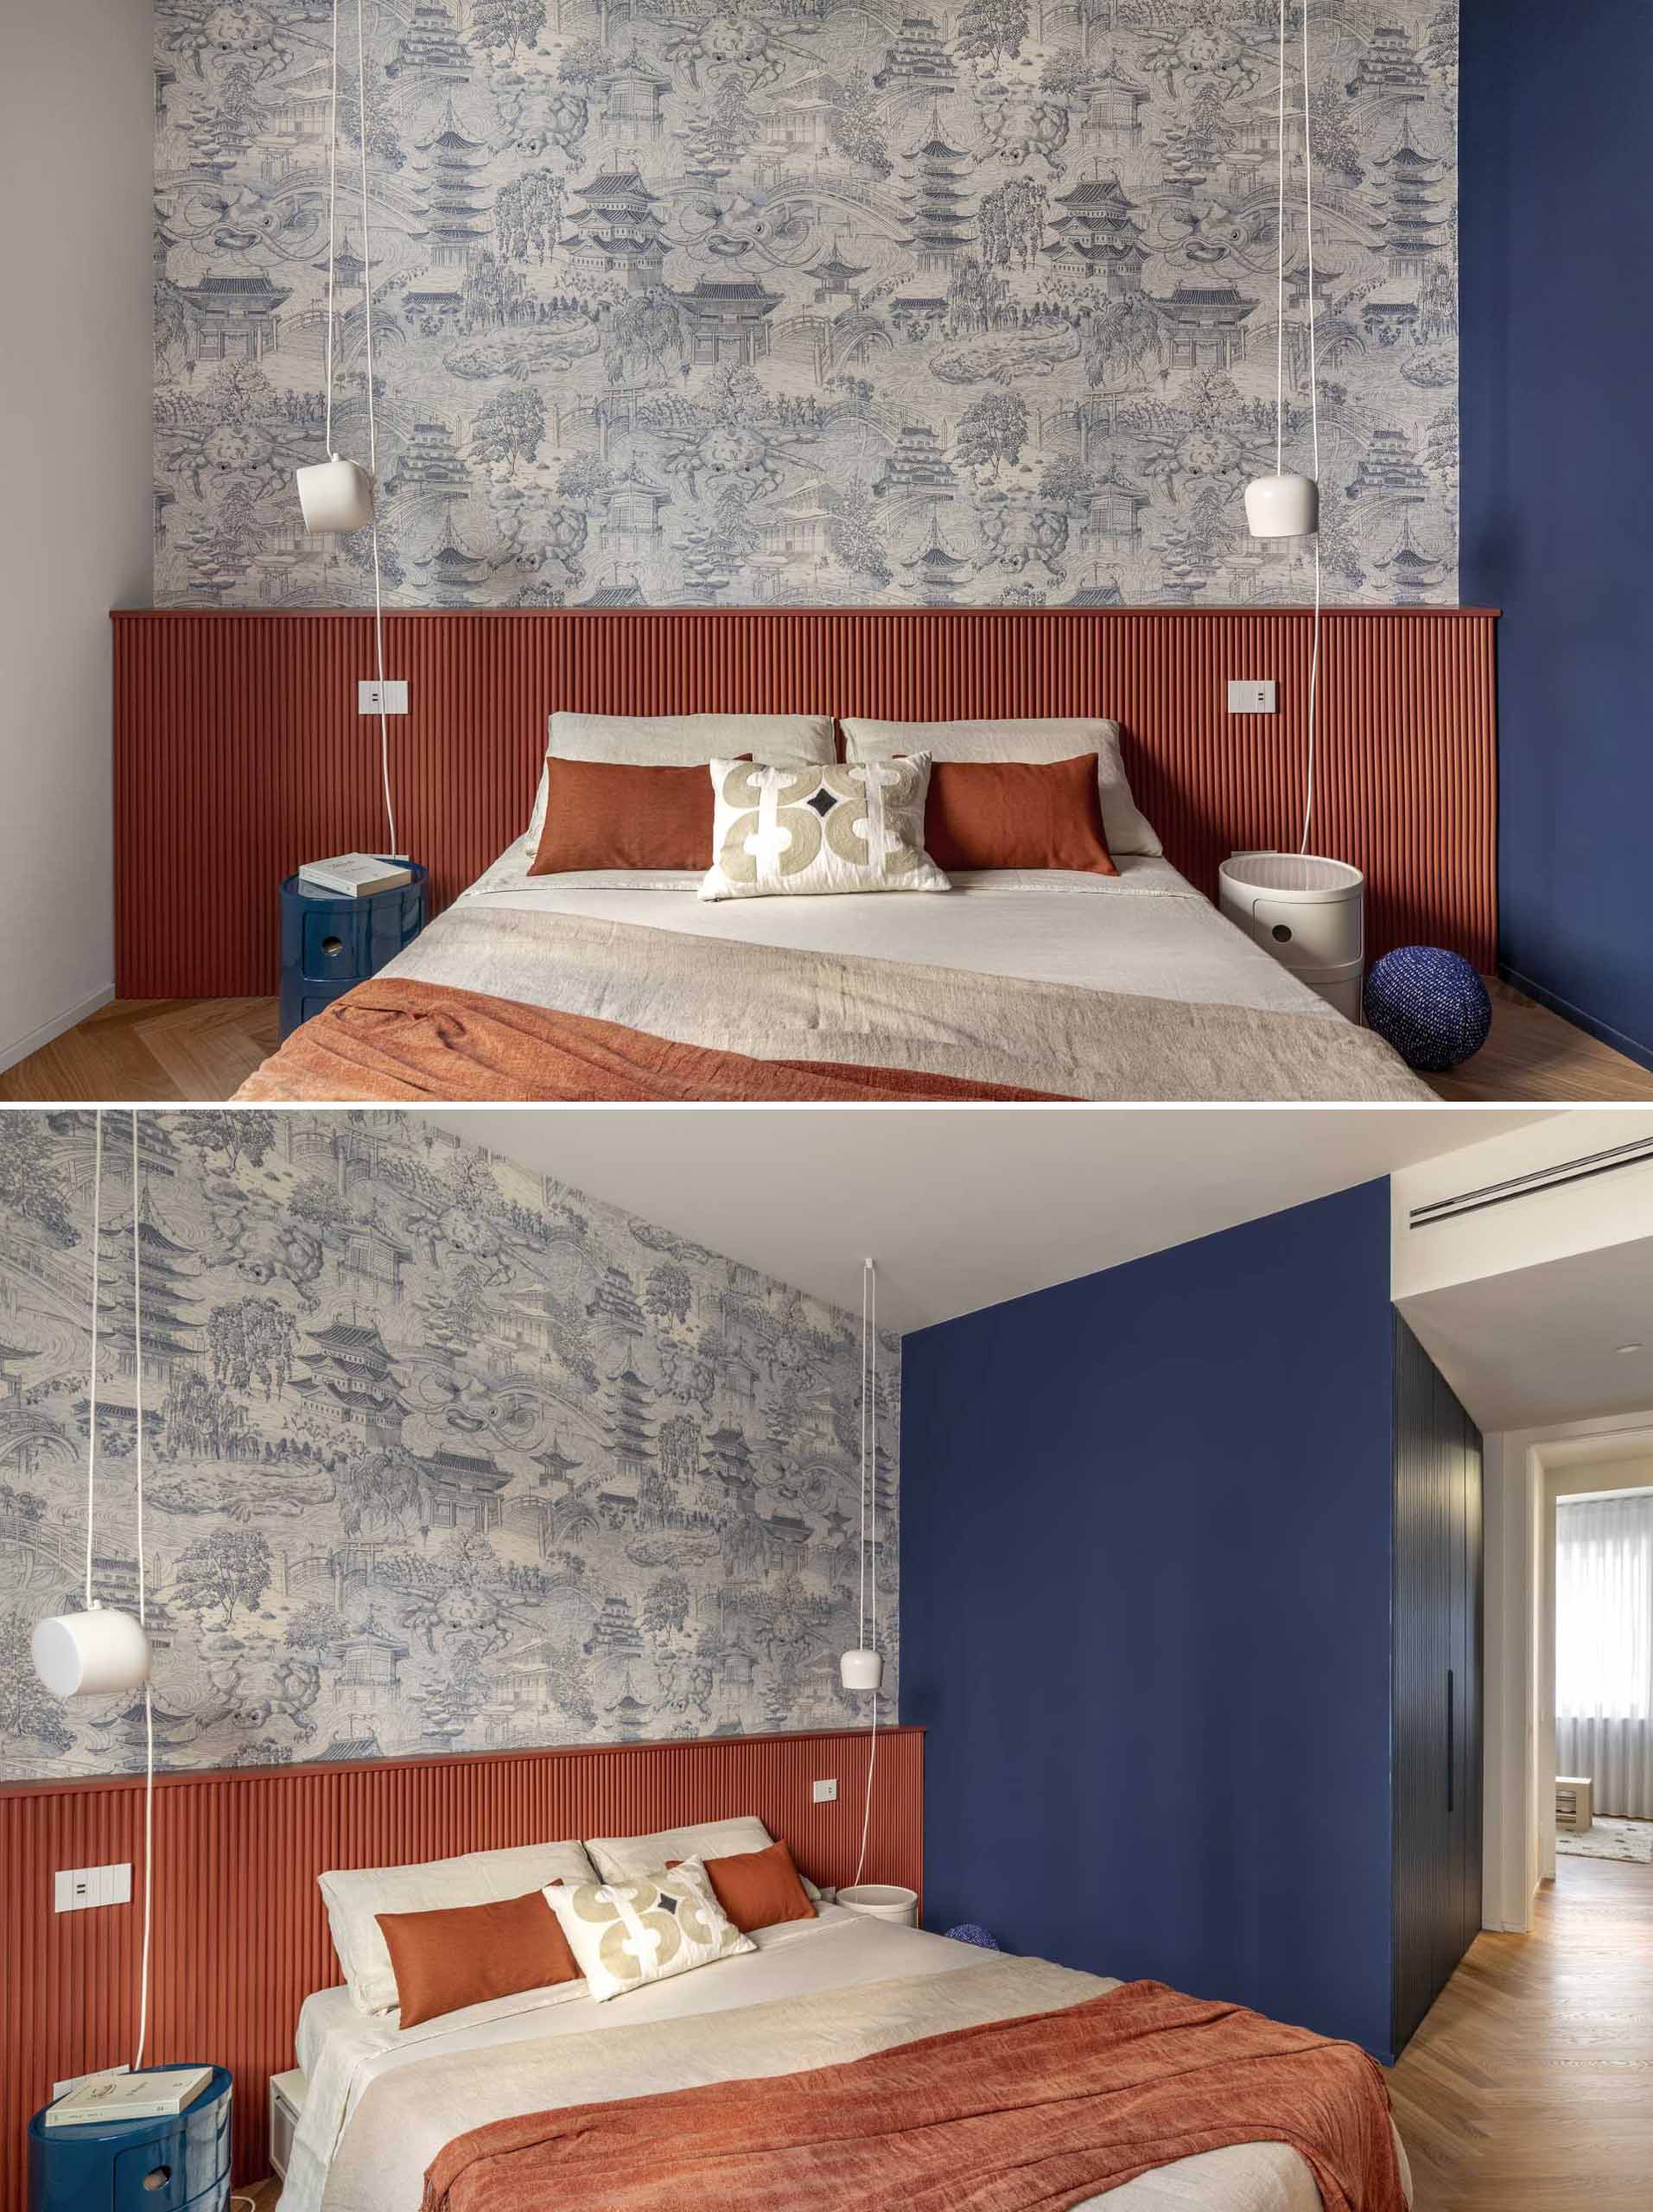 In this primary bedroom, color has been used to define the areas, with a deep terracotta used as a headboard that spans the width of the wall, while deep blue cabinetry is home to the closet. An Asian-inspired wallpaper complements the blue accents in the room.